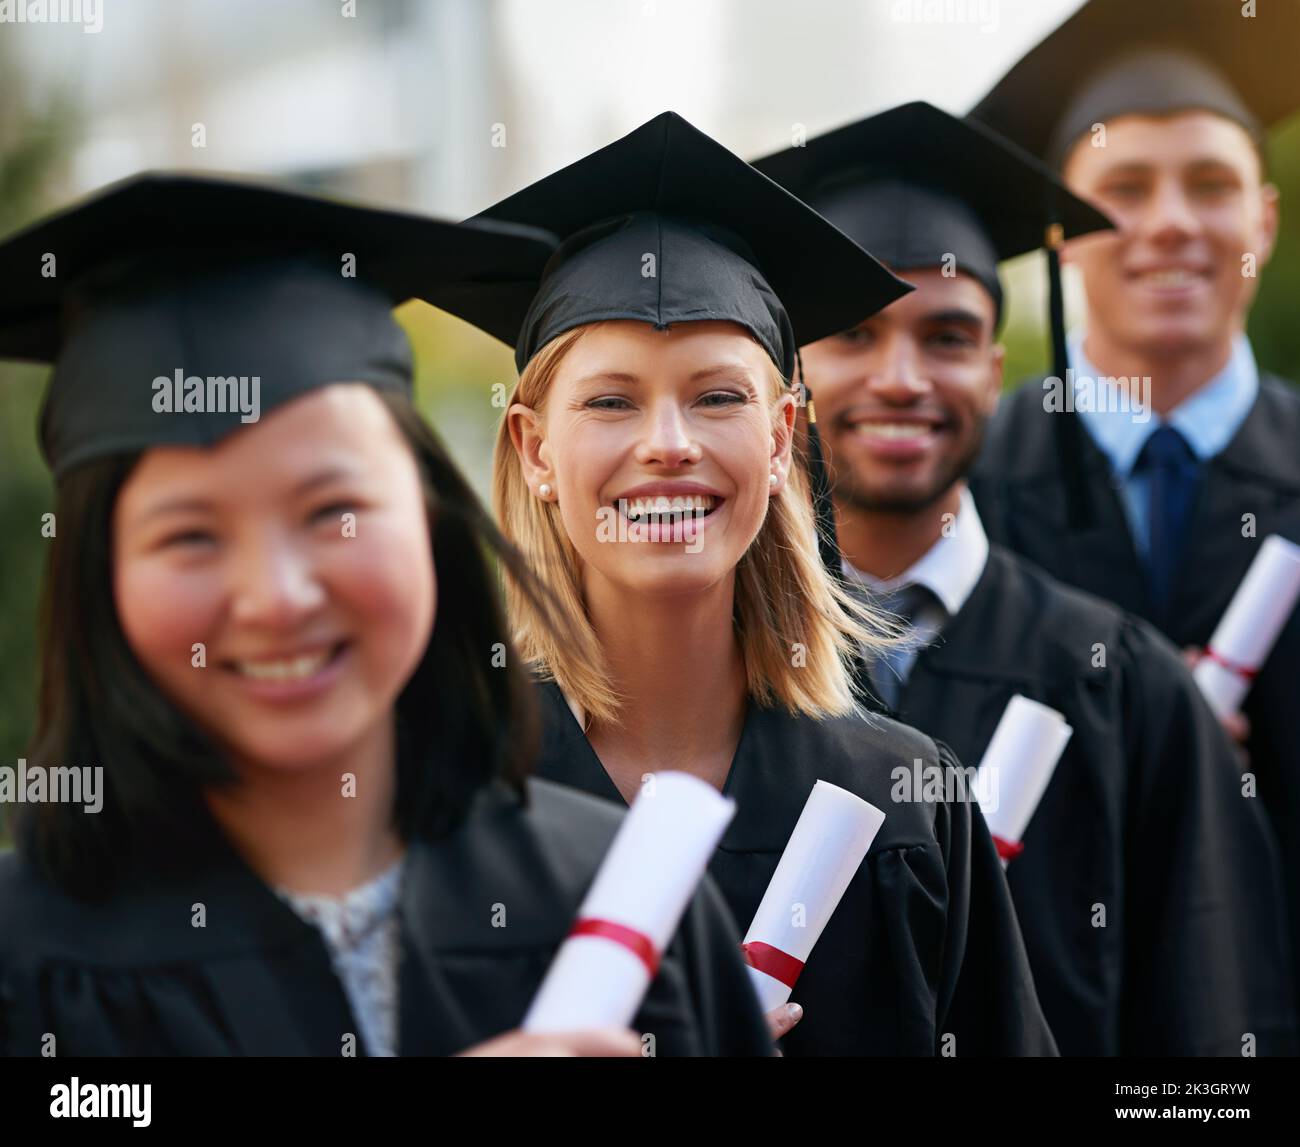 Let new adventures begin...A group of college graduates standing in cap and gown and holding their diplomas. Stock Photo